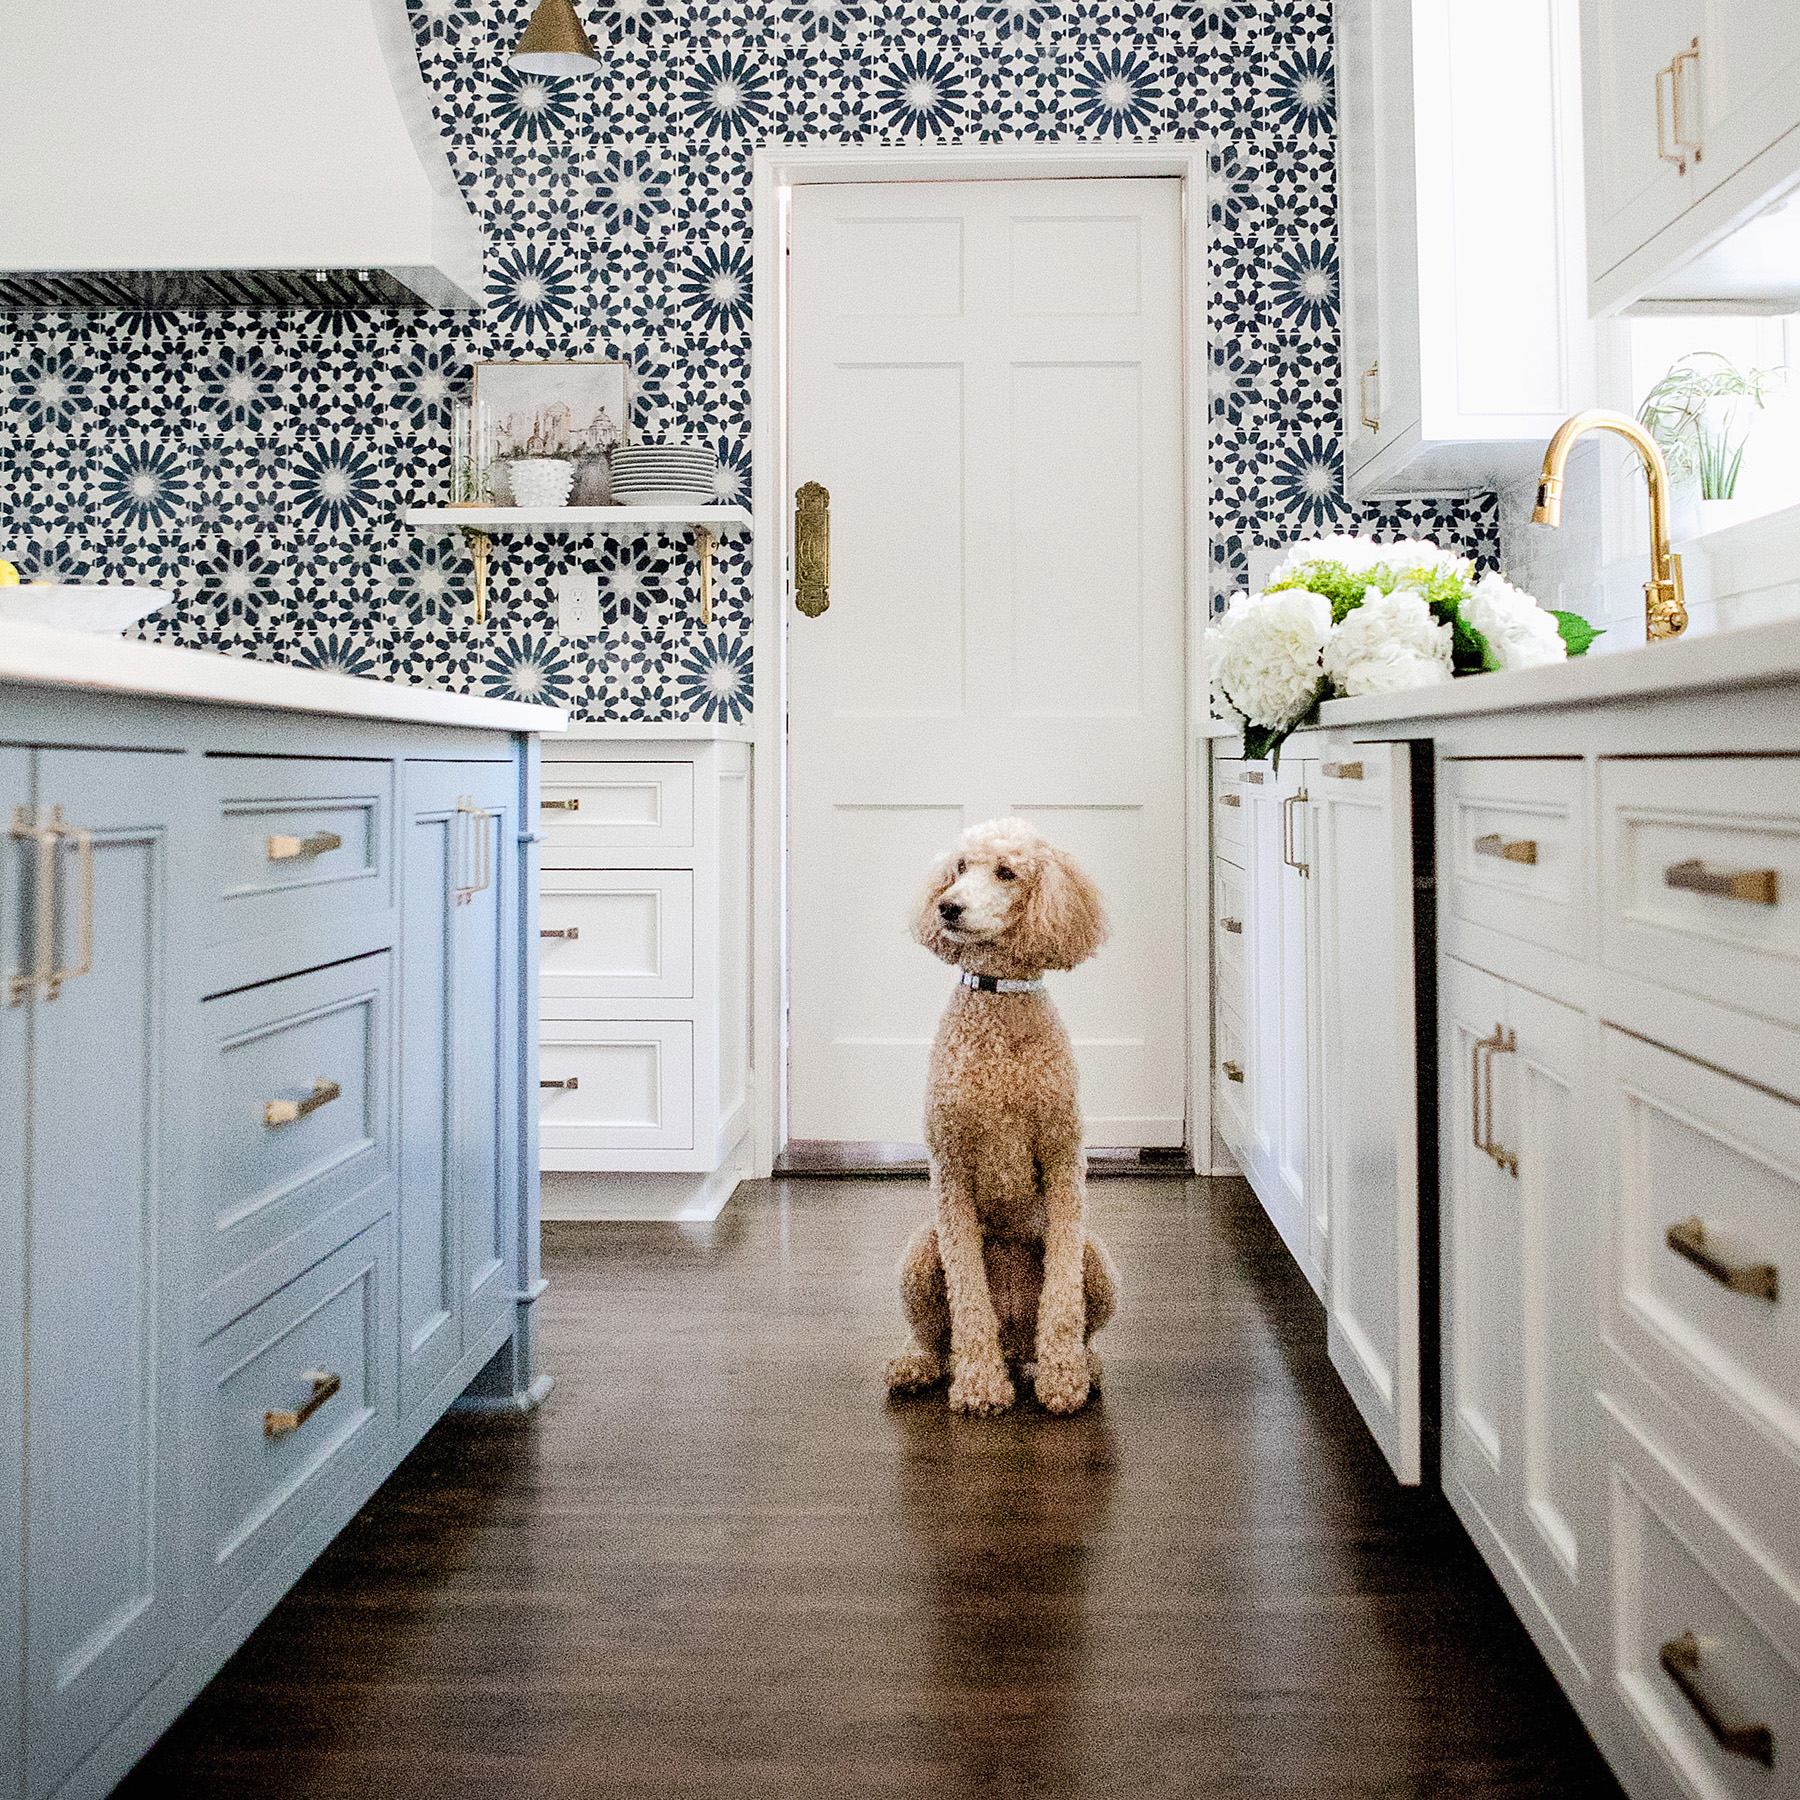 Poodle sitting in kitchen